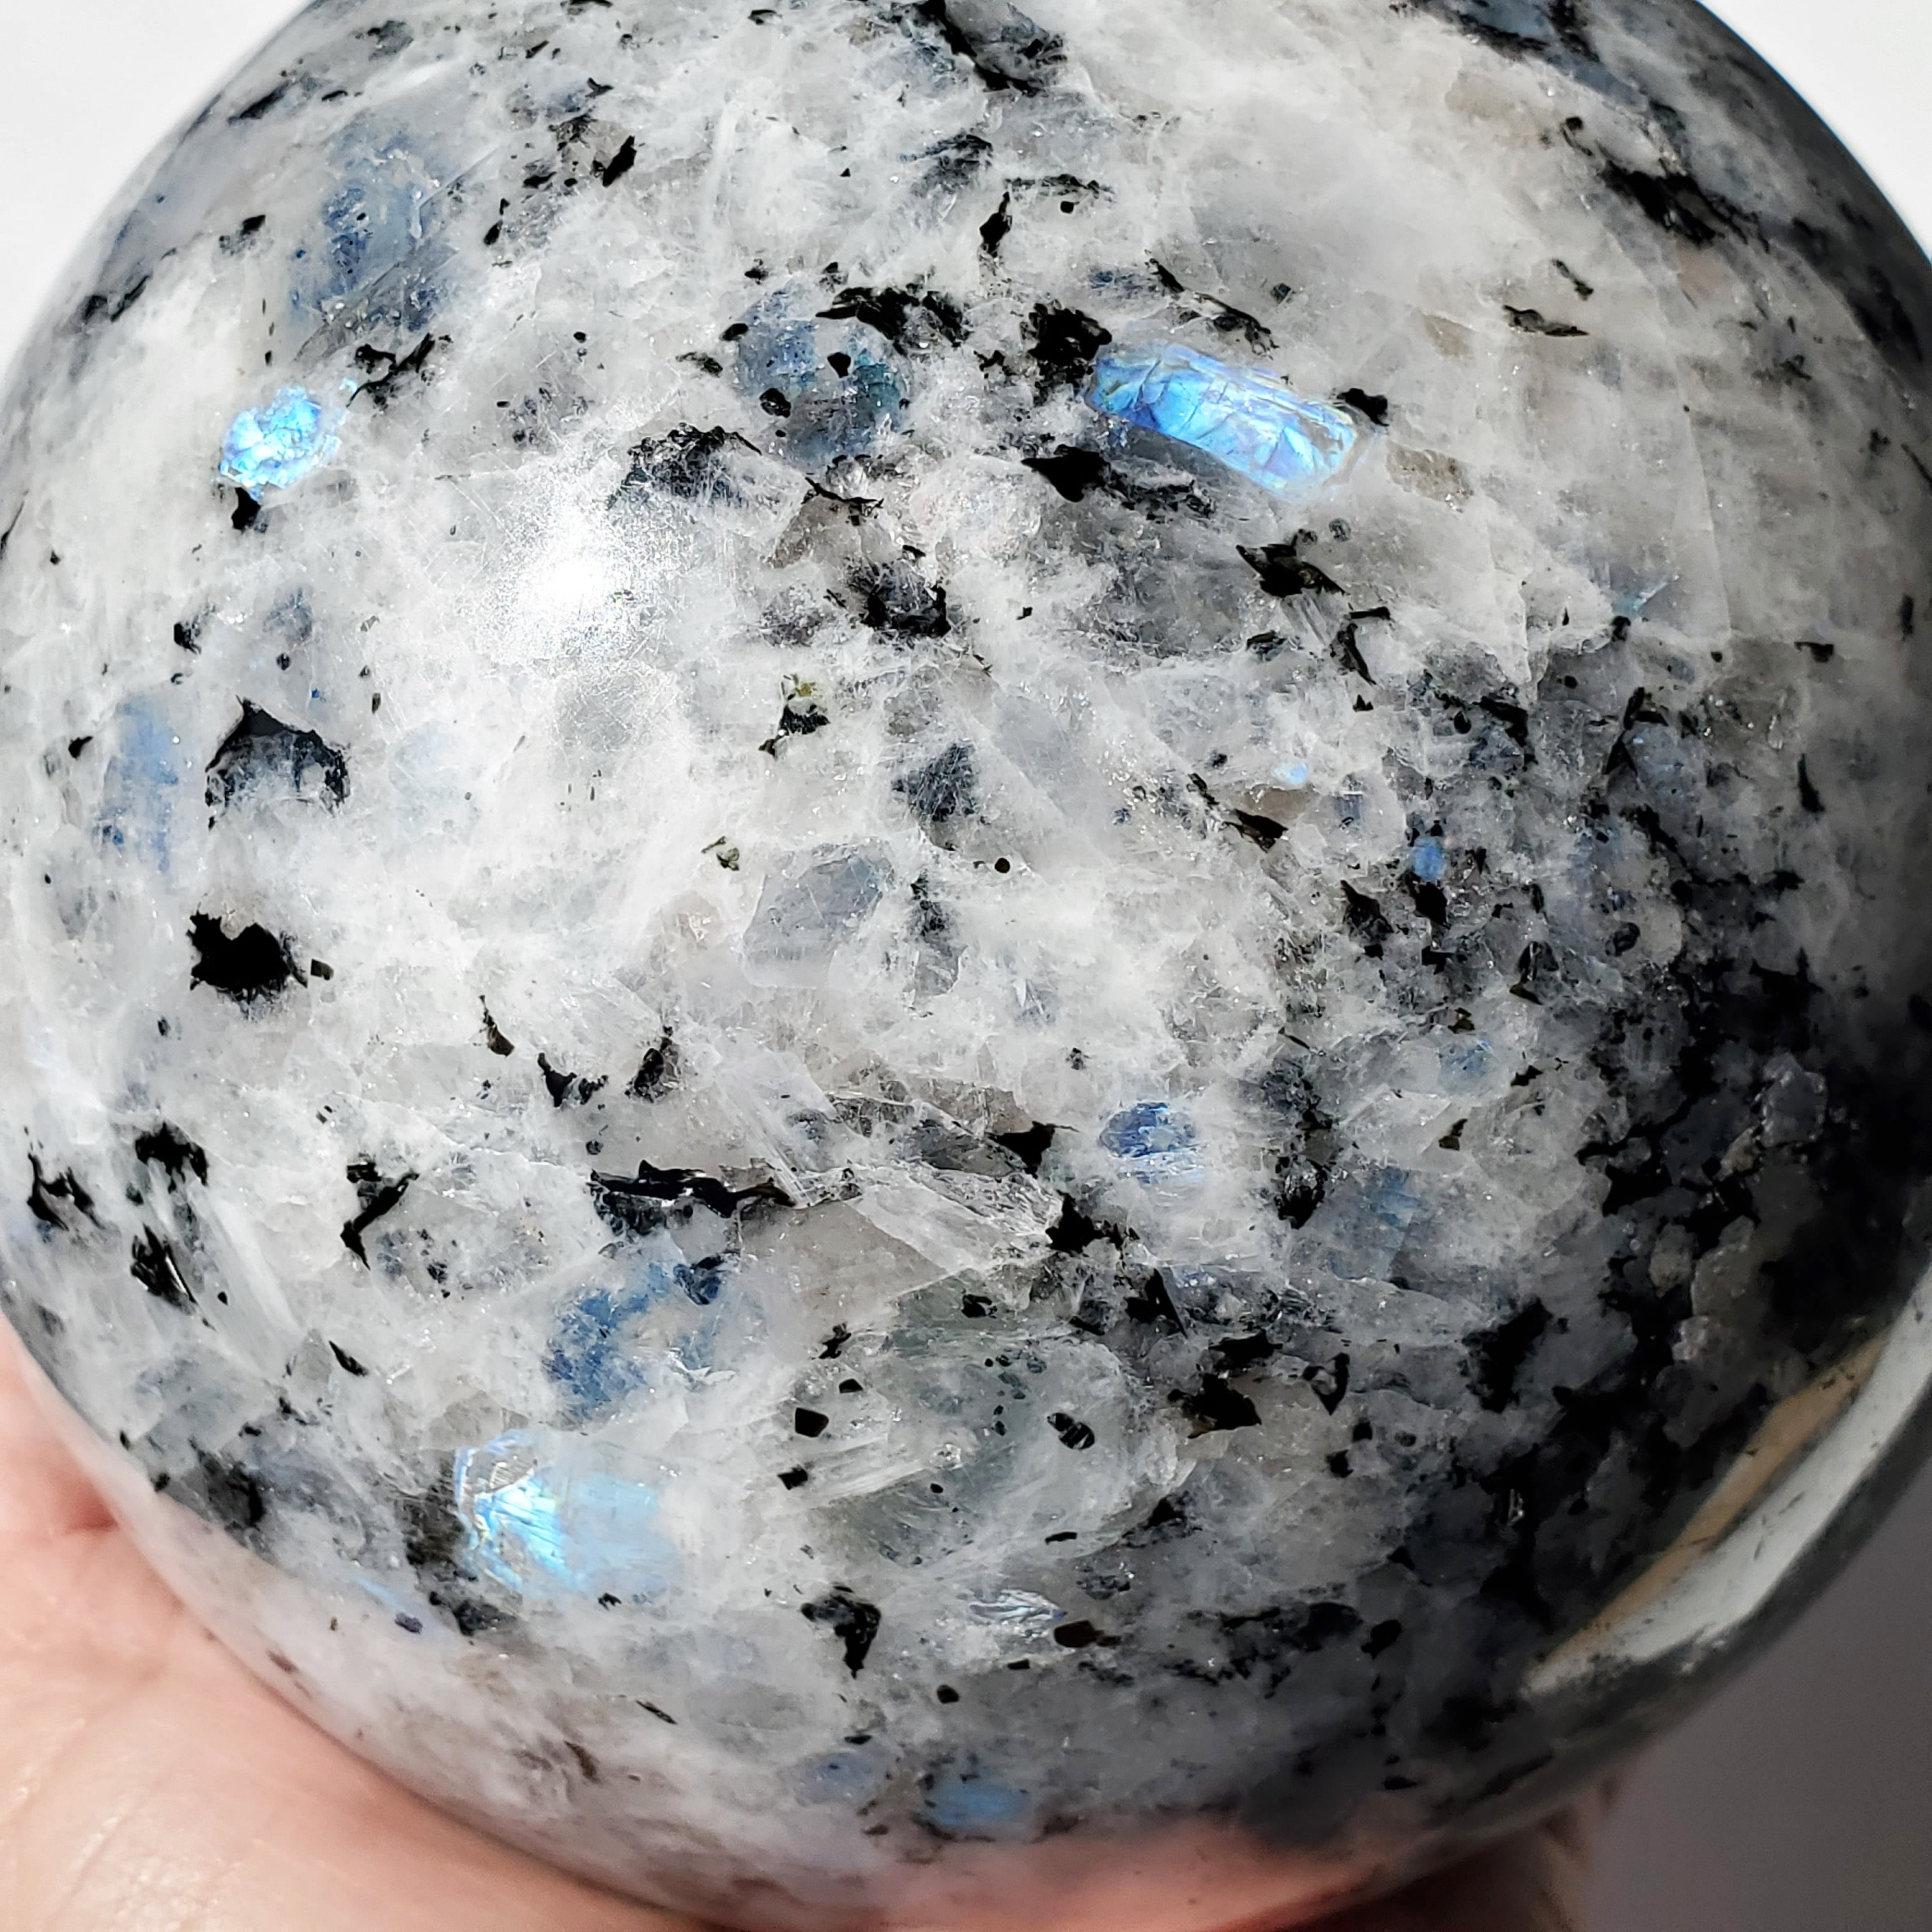 Moonstone Sphere, peach flashes & rainbow inclusions